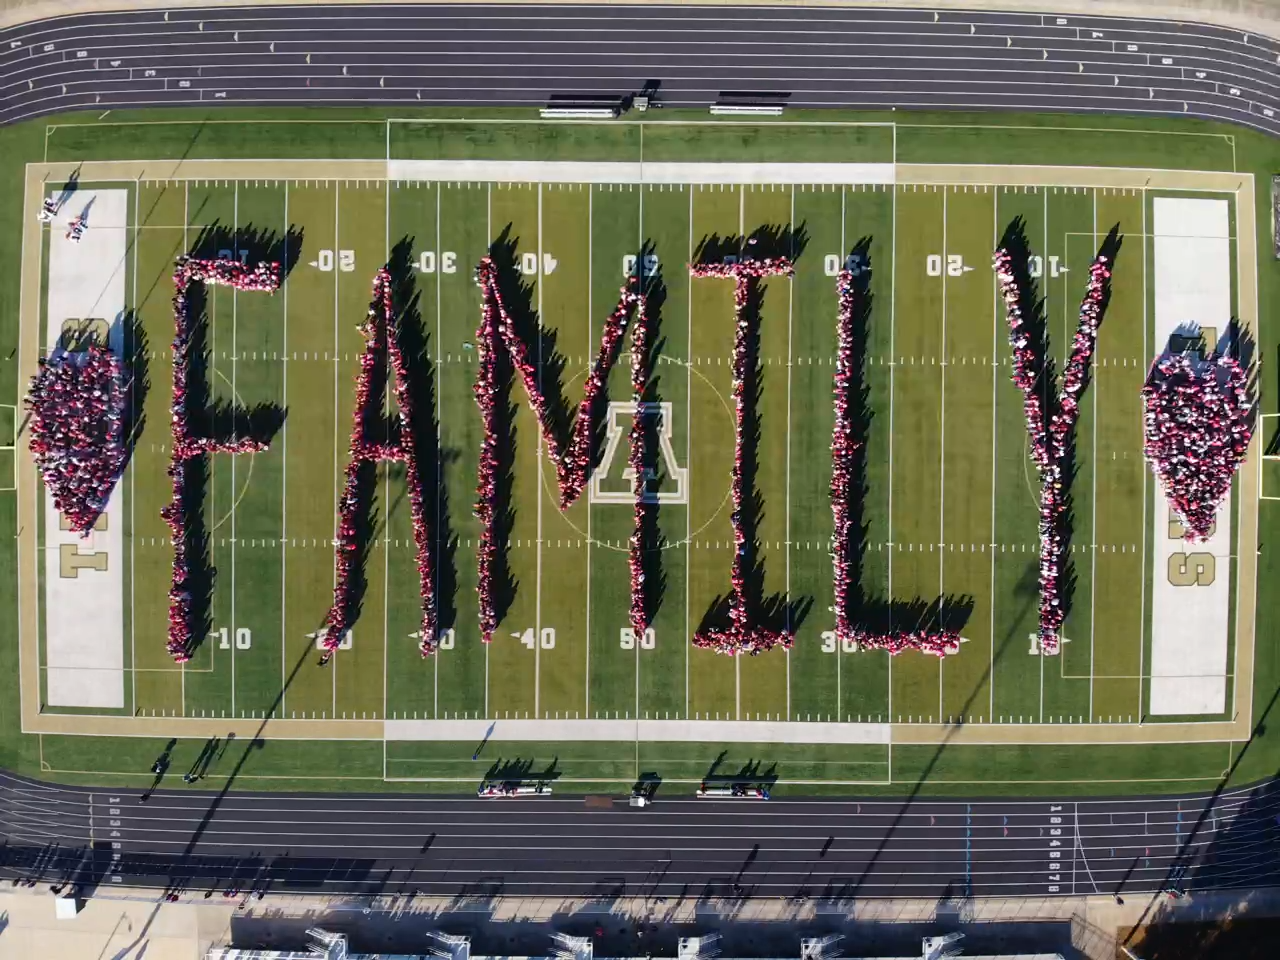 Family spelled out on the AHS football field